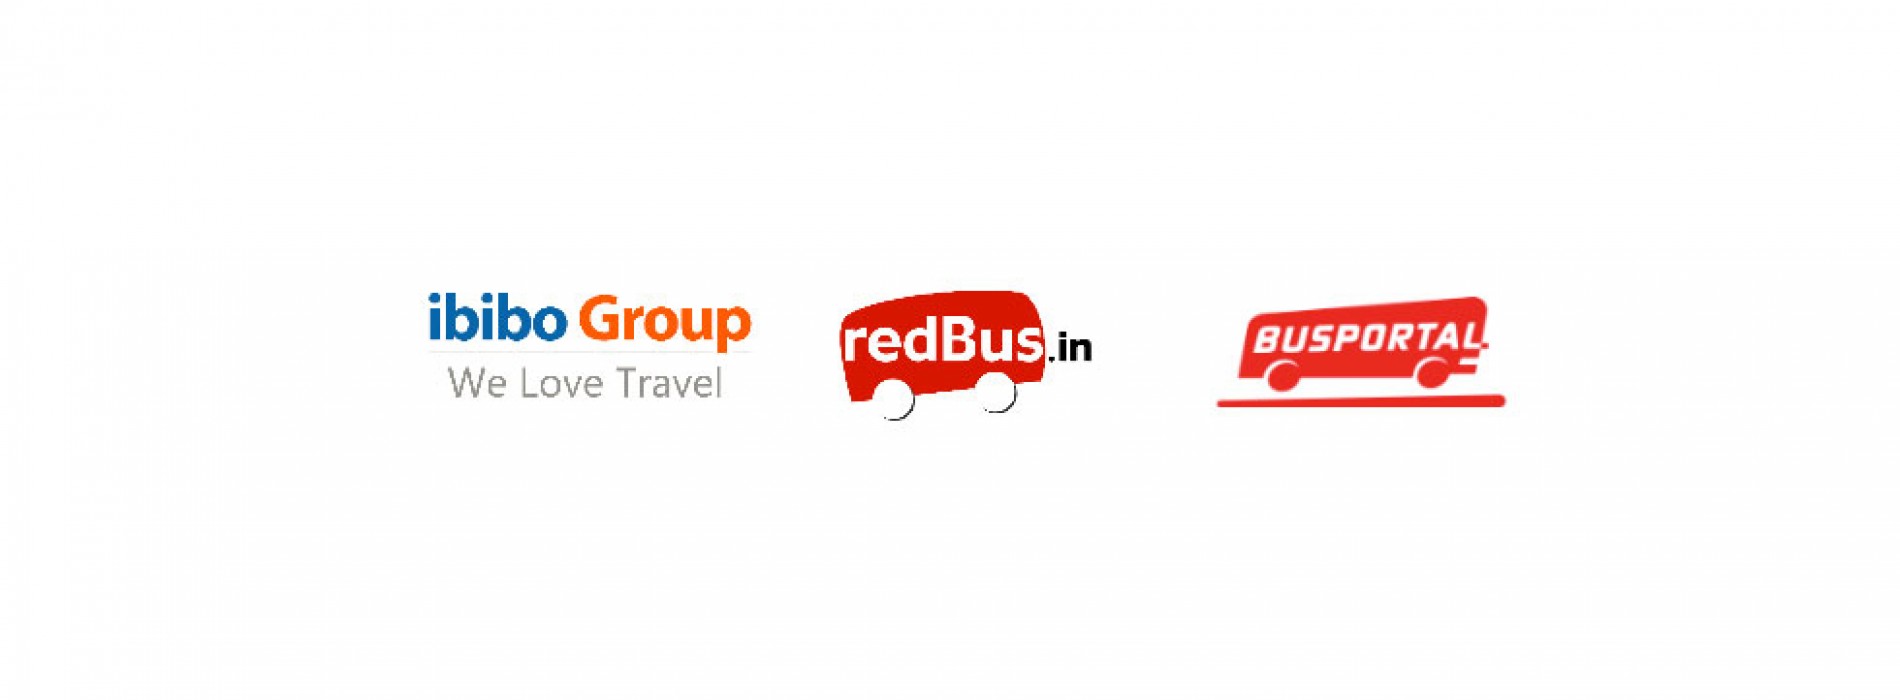 ibibo-owned redBus expands into Latin America